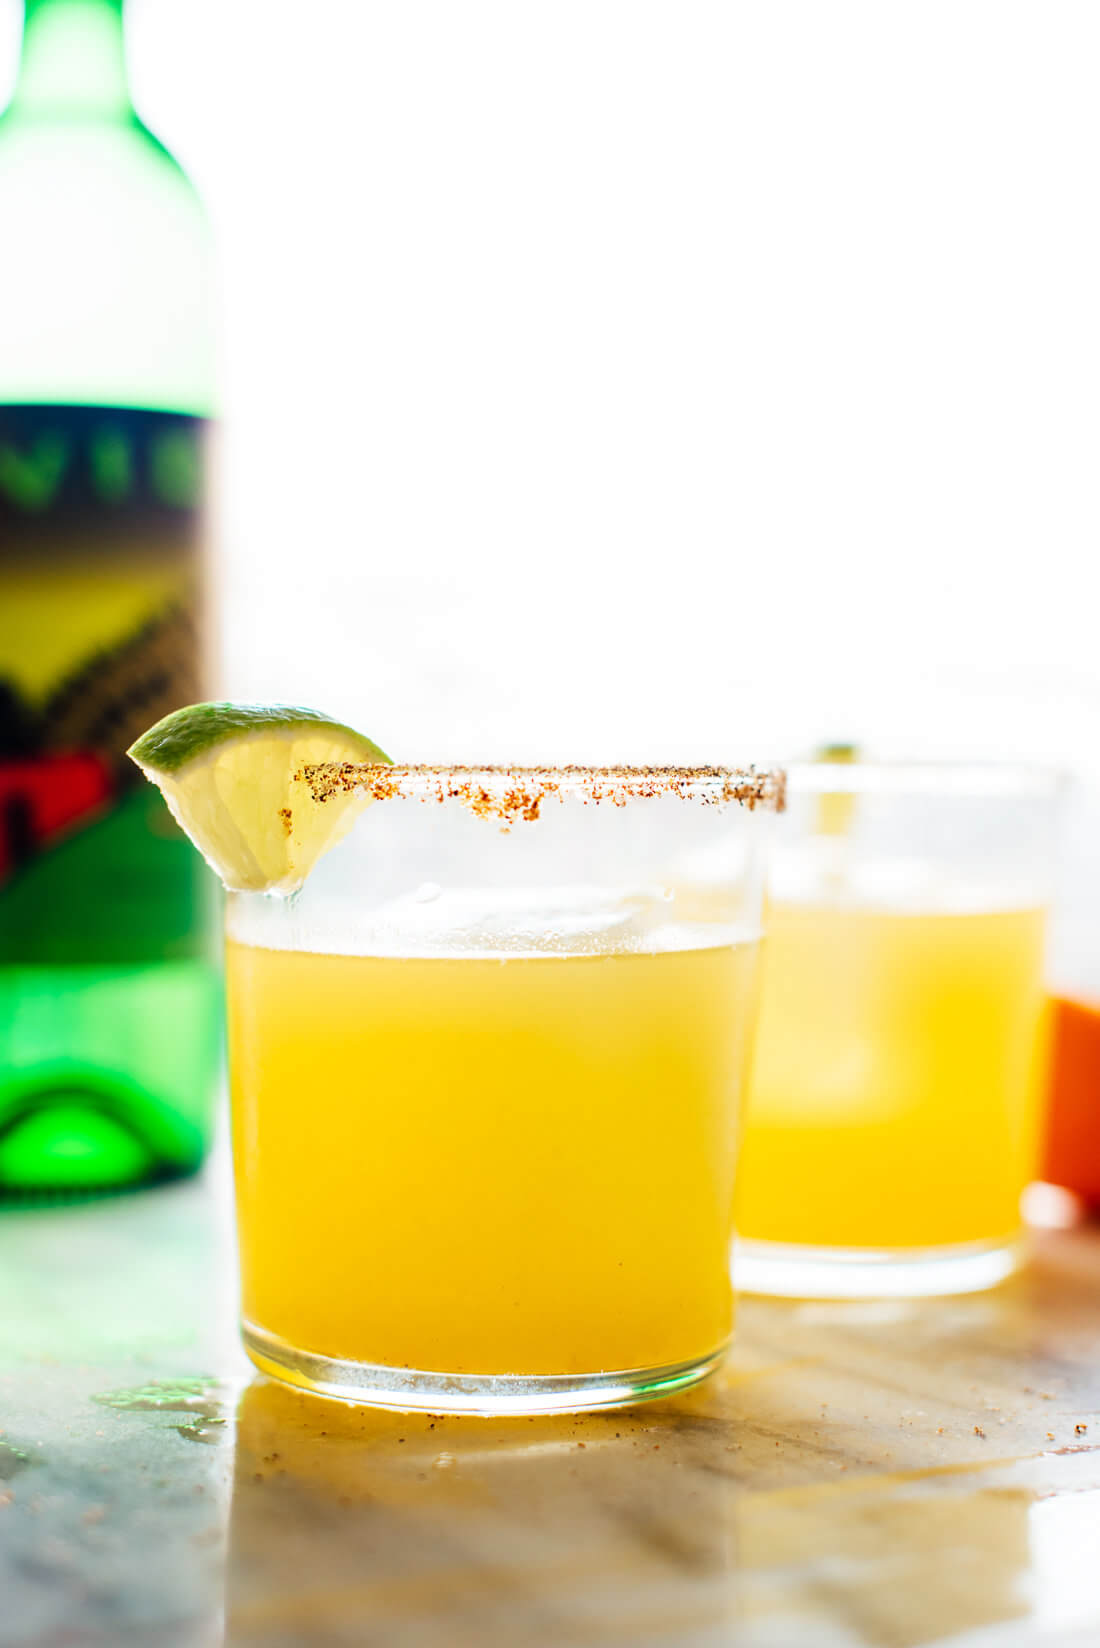 Learn how to make mezcalitas at home with mezcal, fresh orange and lime juice! Get the recipe at cookieandkate.com